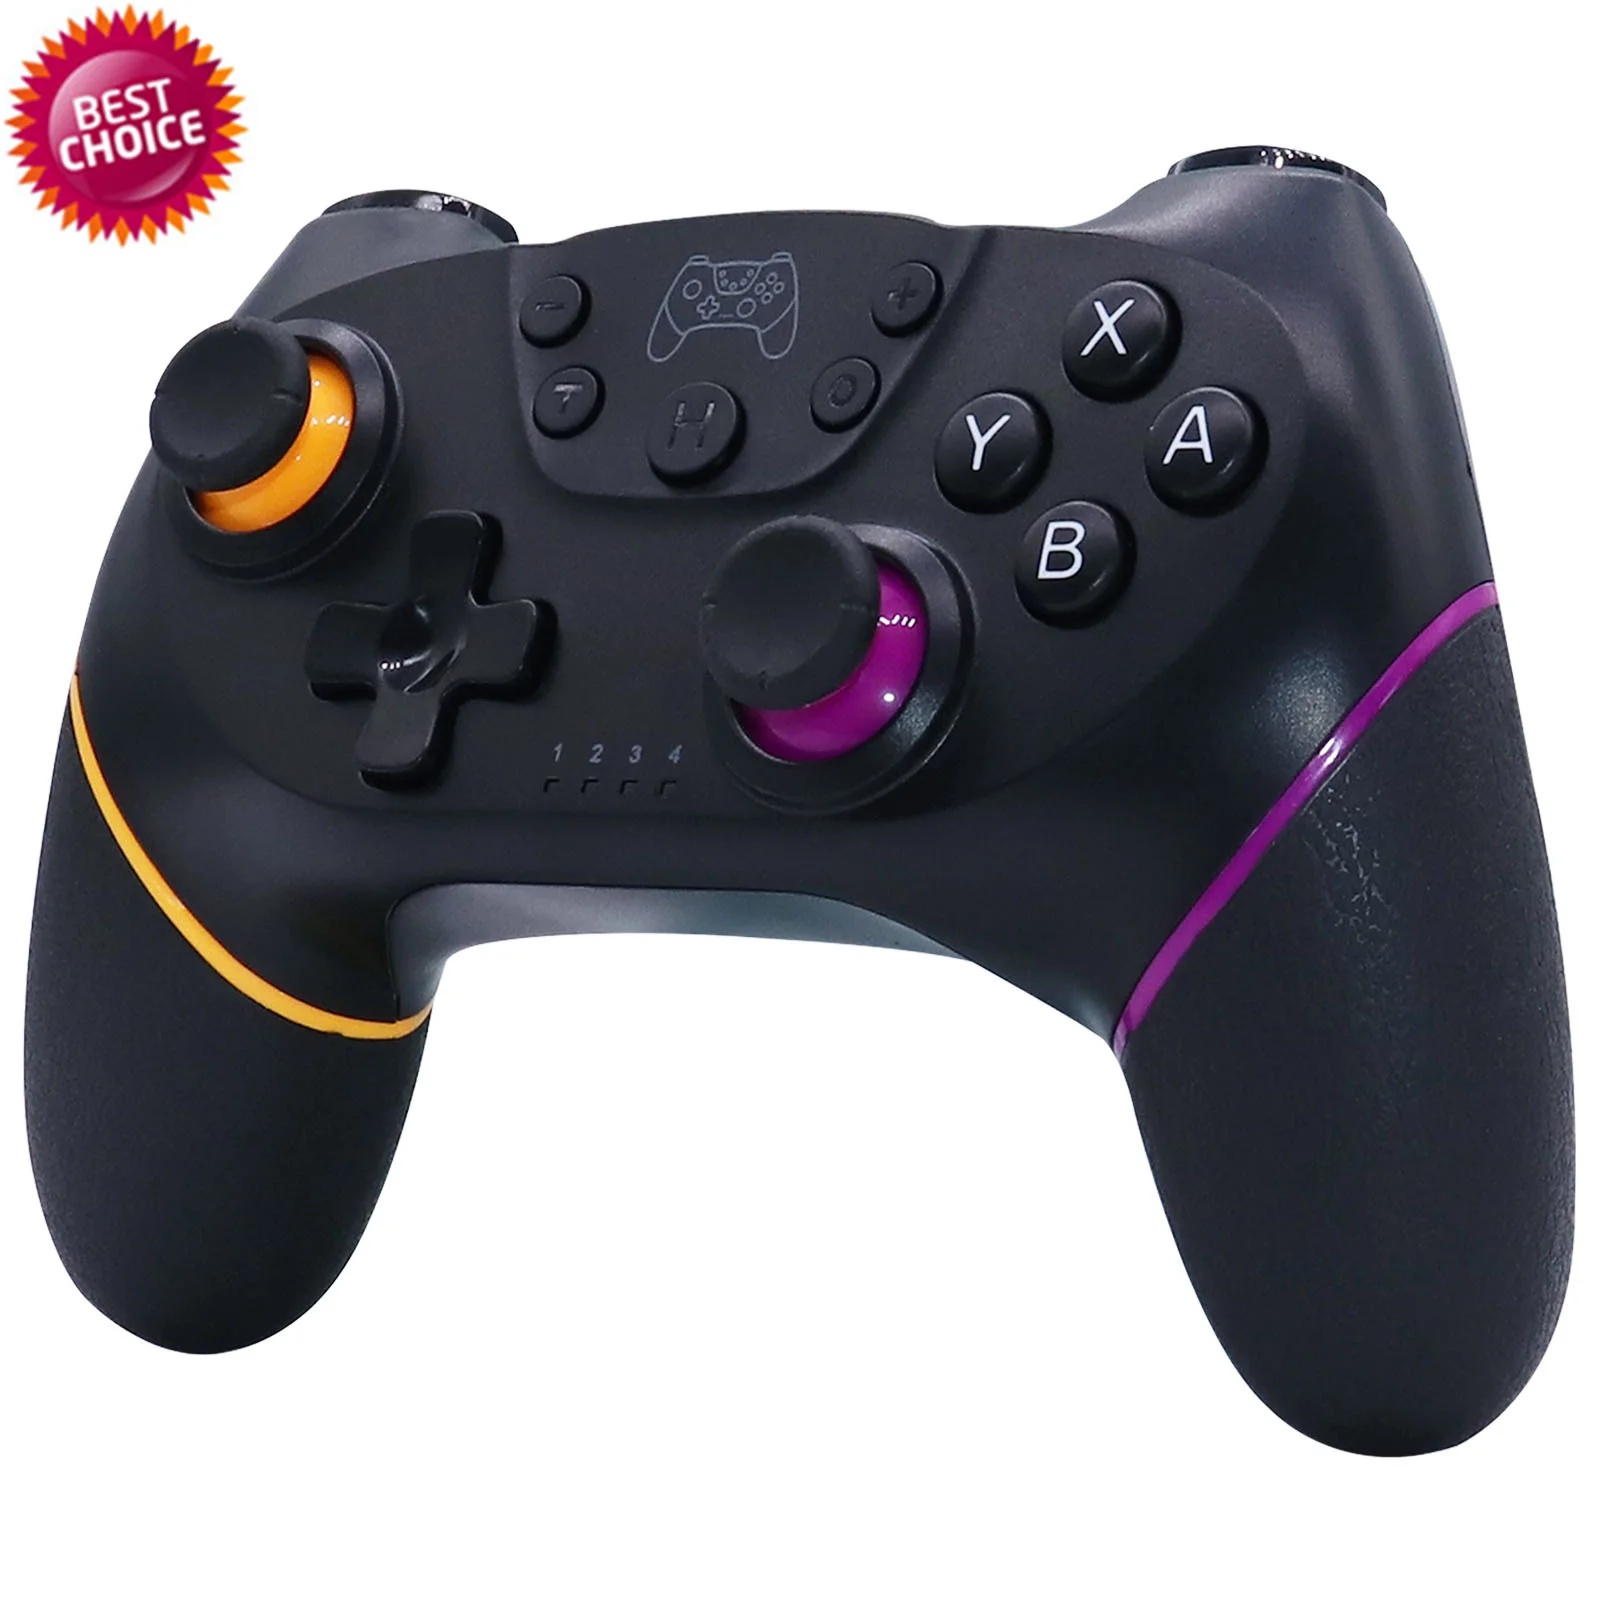 

Manette Wireless Remote Control Switch Joystick Game Controller Gamepad For Nintendo Switch Gaming Joypad PC, 11 colors